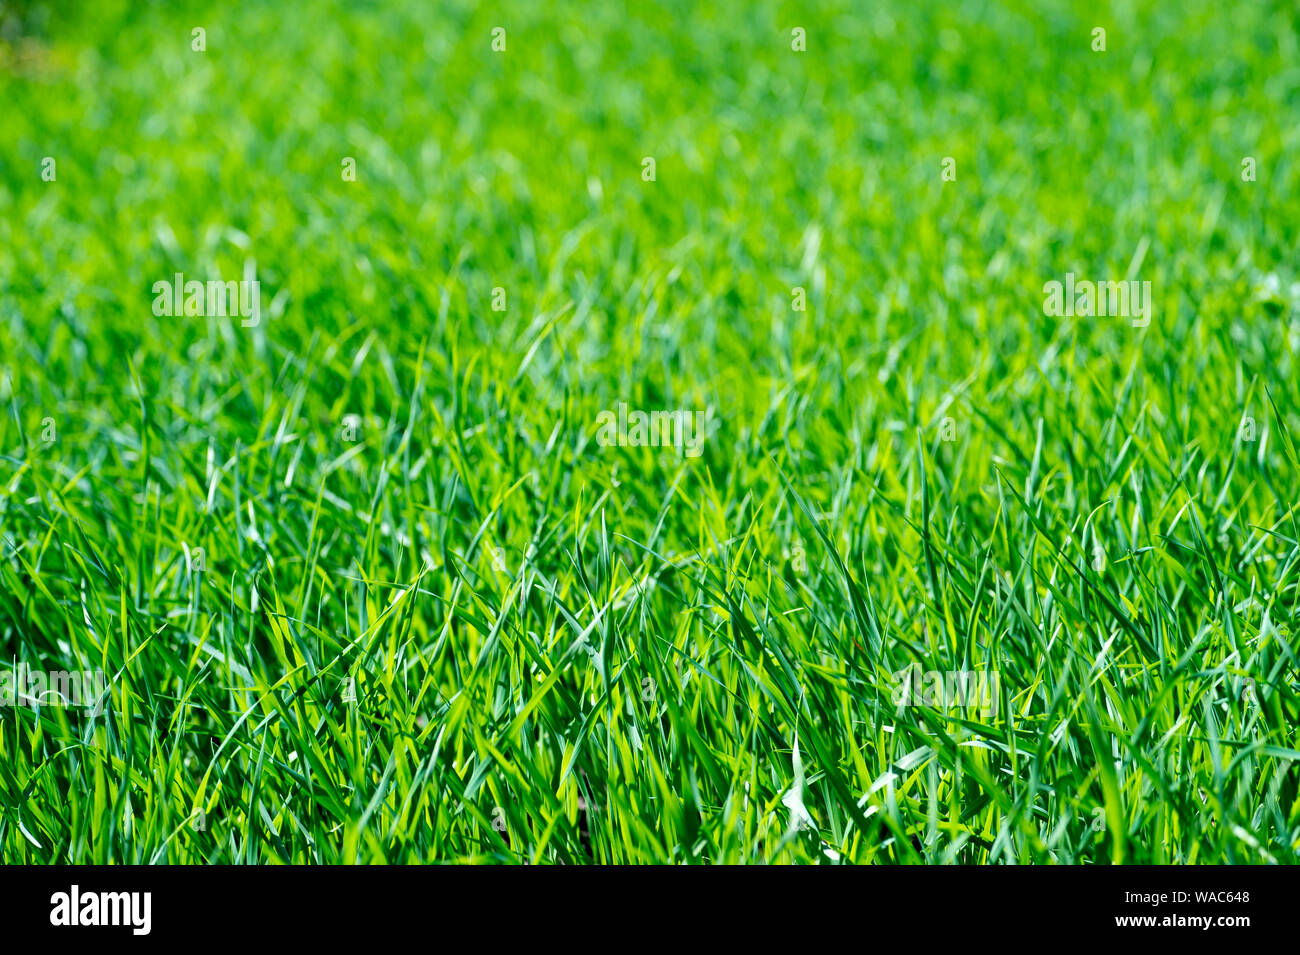 Young green grass in sunlight. Organic texture. Stock Photo